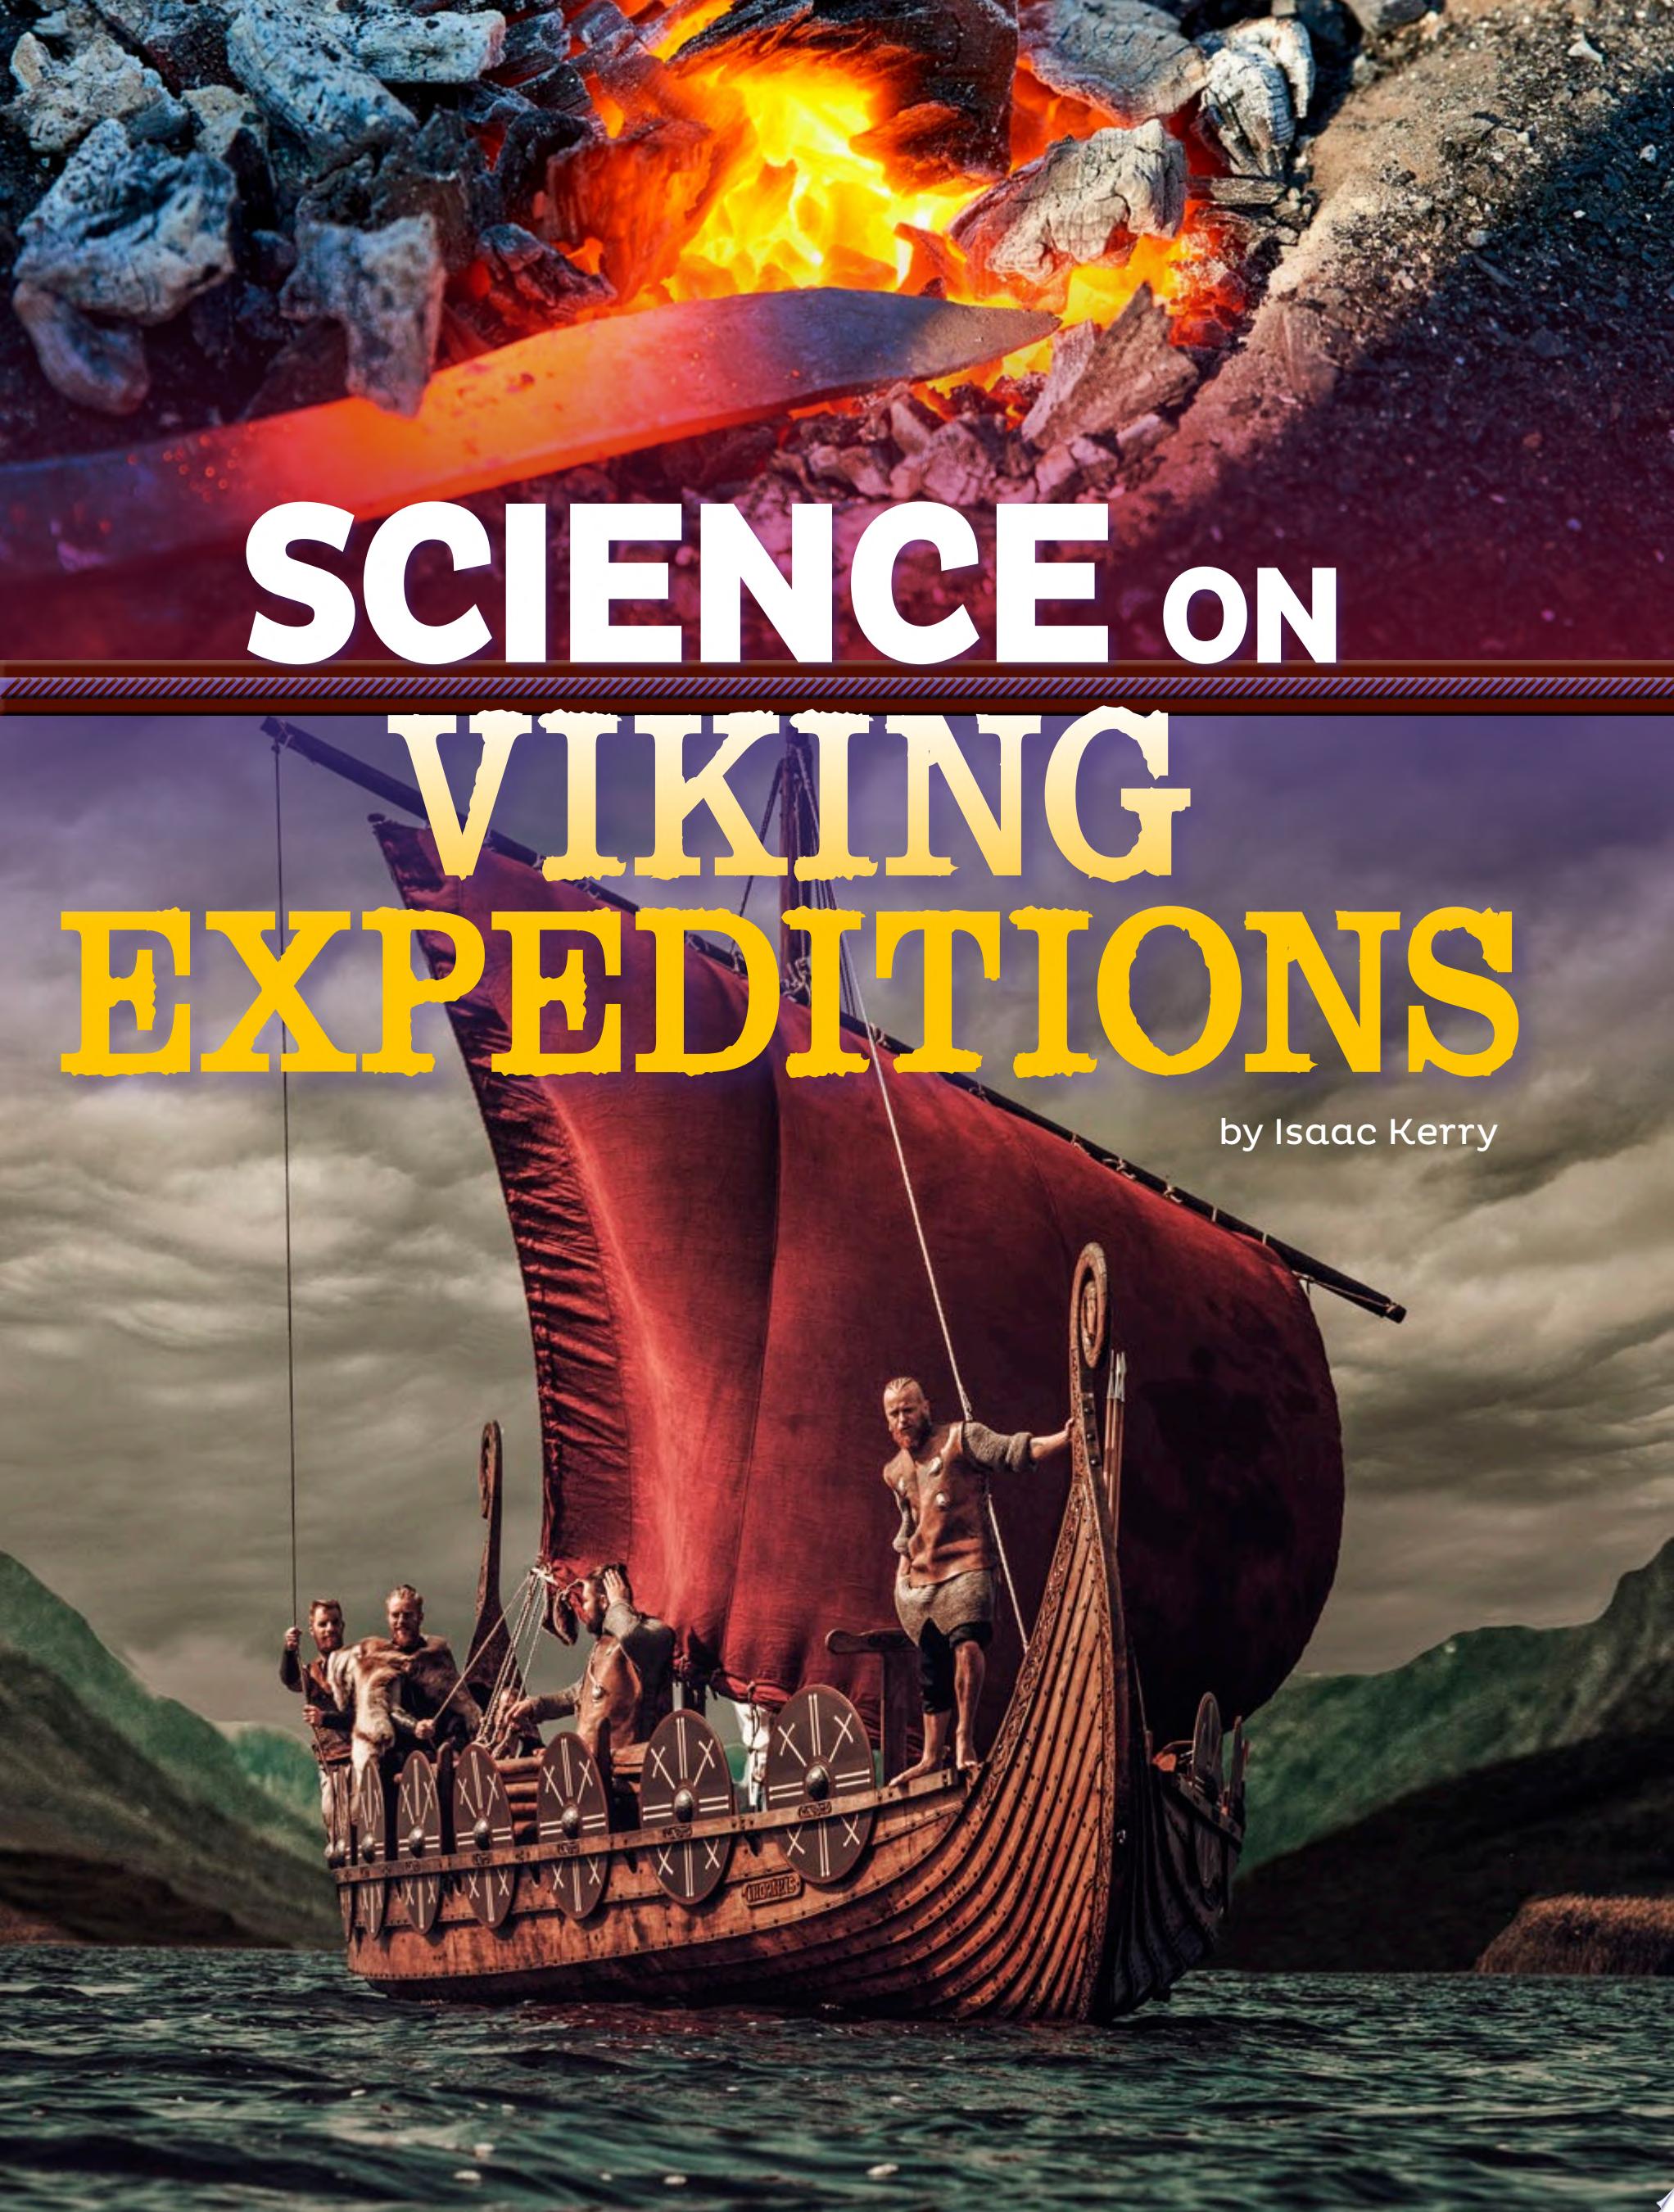 Image for "Science on Viking Expeditions"